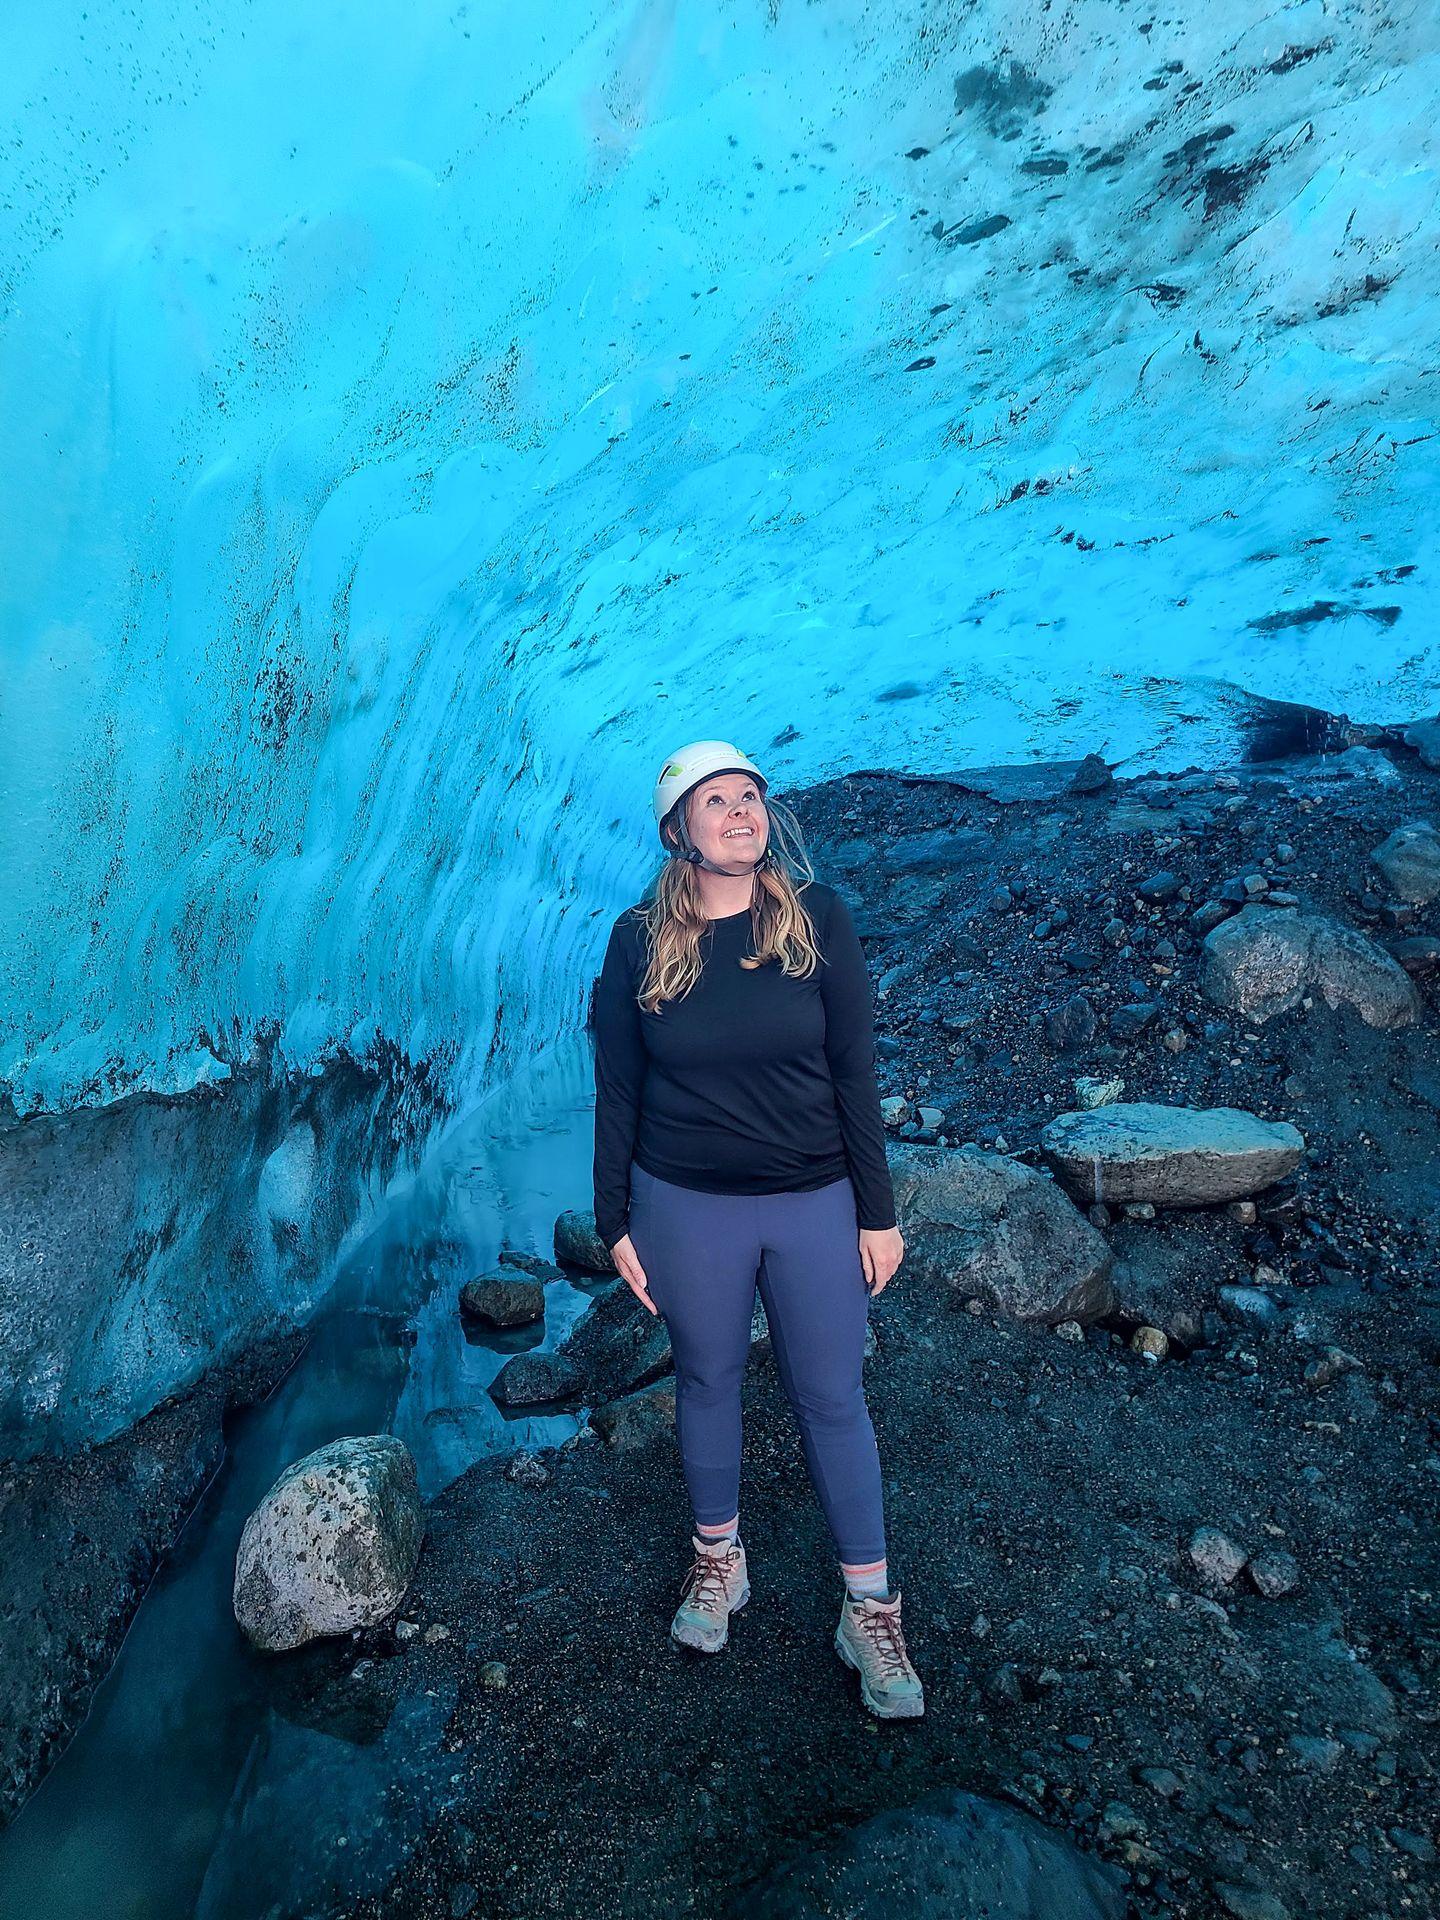 Lydia standing inside of an ice cave made of bright blue ice. She wears a helmet, blue leggings and a black shirt.